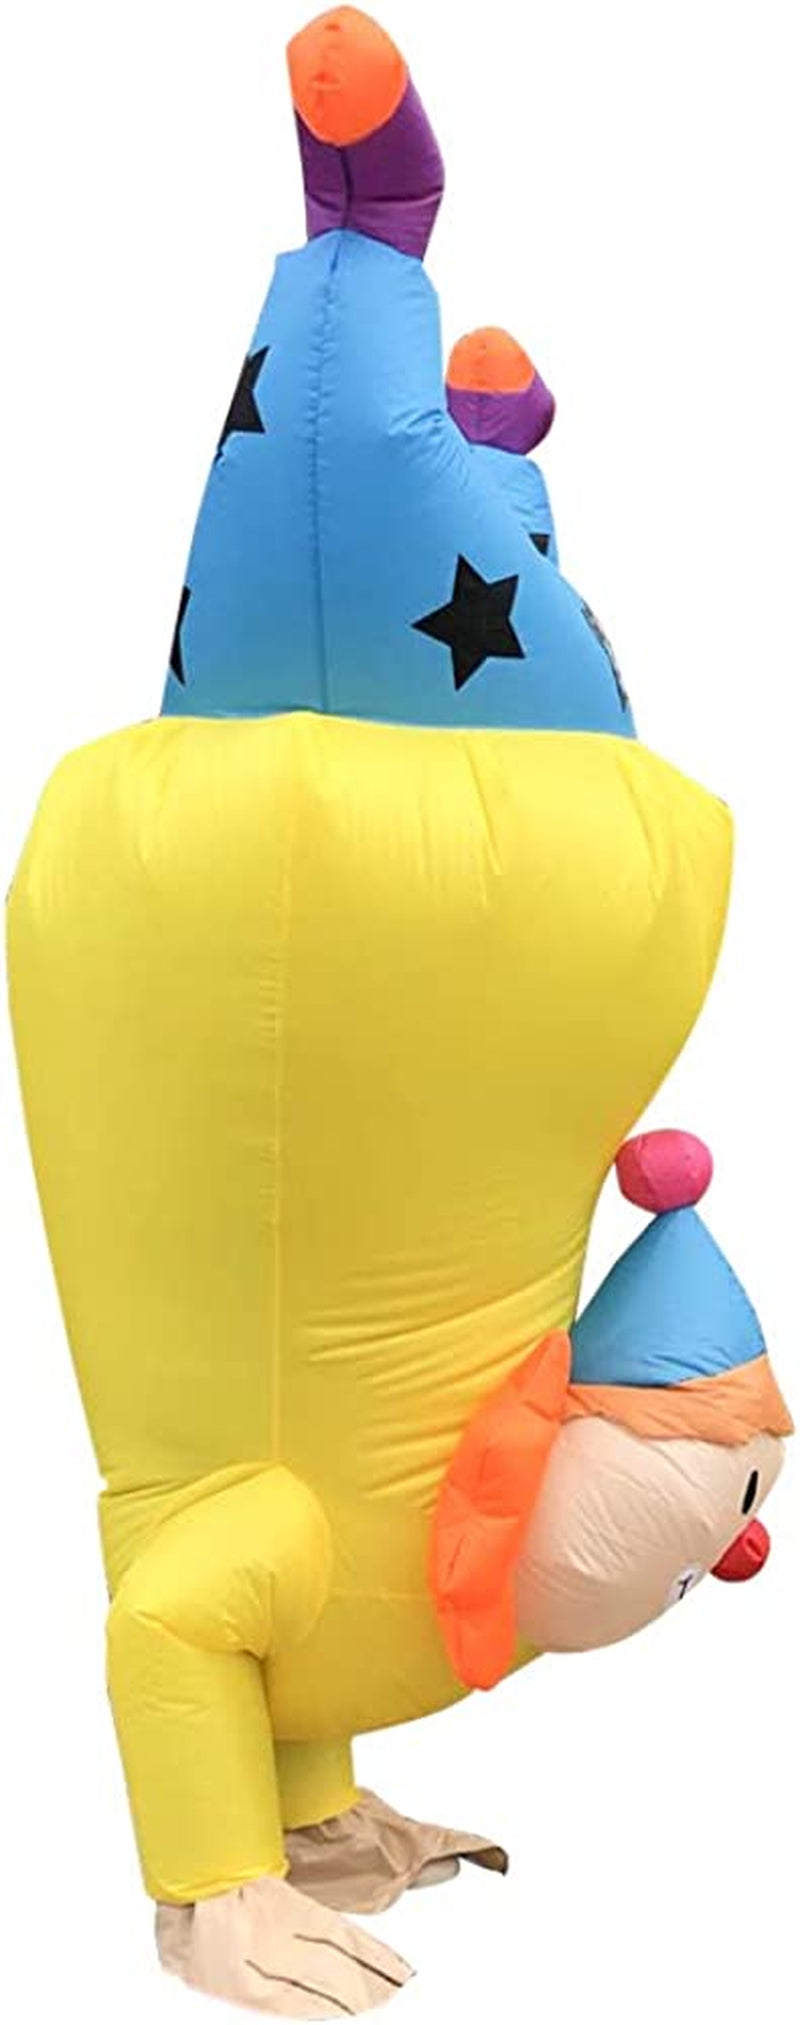 Nisotieb Supper Funny Halloween Inflatable Costume Halloween Blow-Up Costume for Adult Halloween Costume/Christmas Party  NiSotieb   